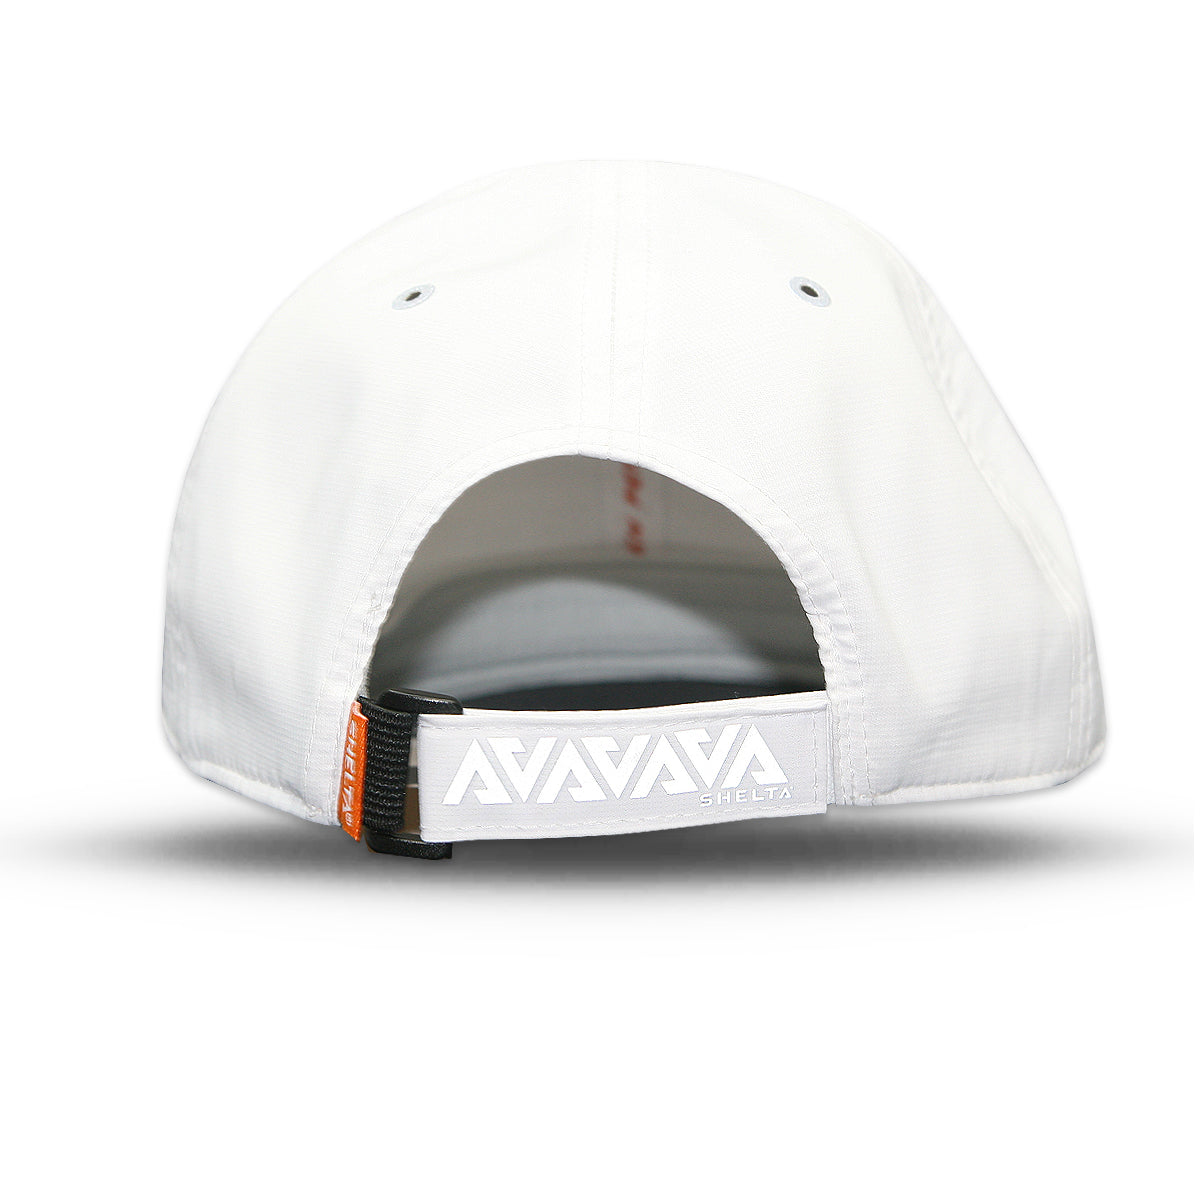 The Icarus Cap in White is a perfect fusion of style and performance.